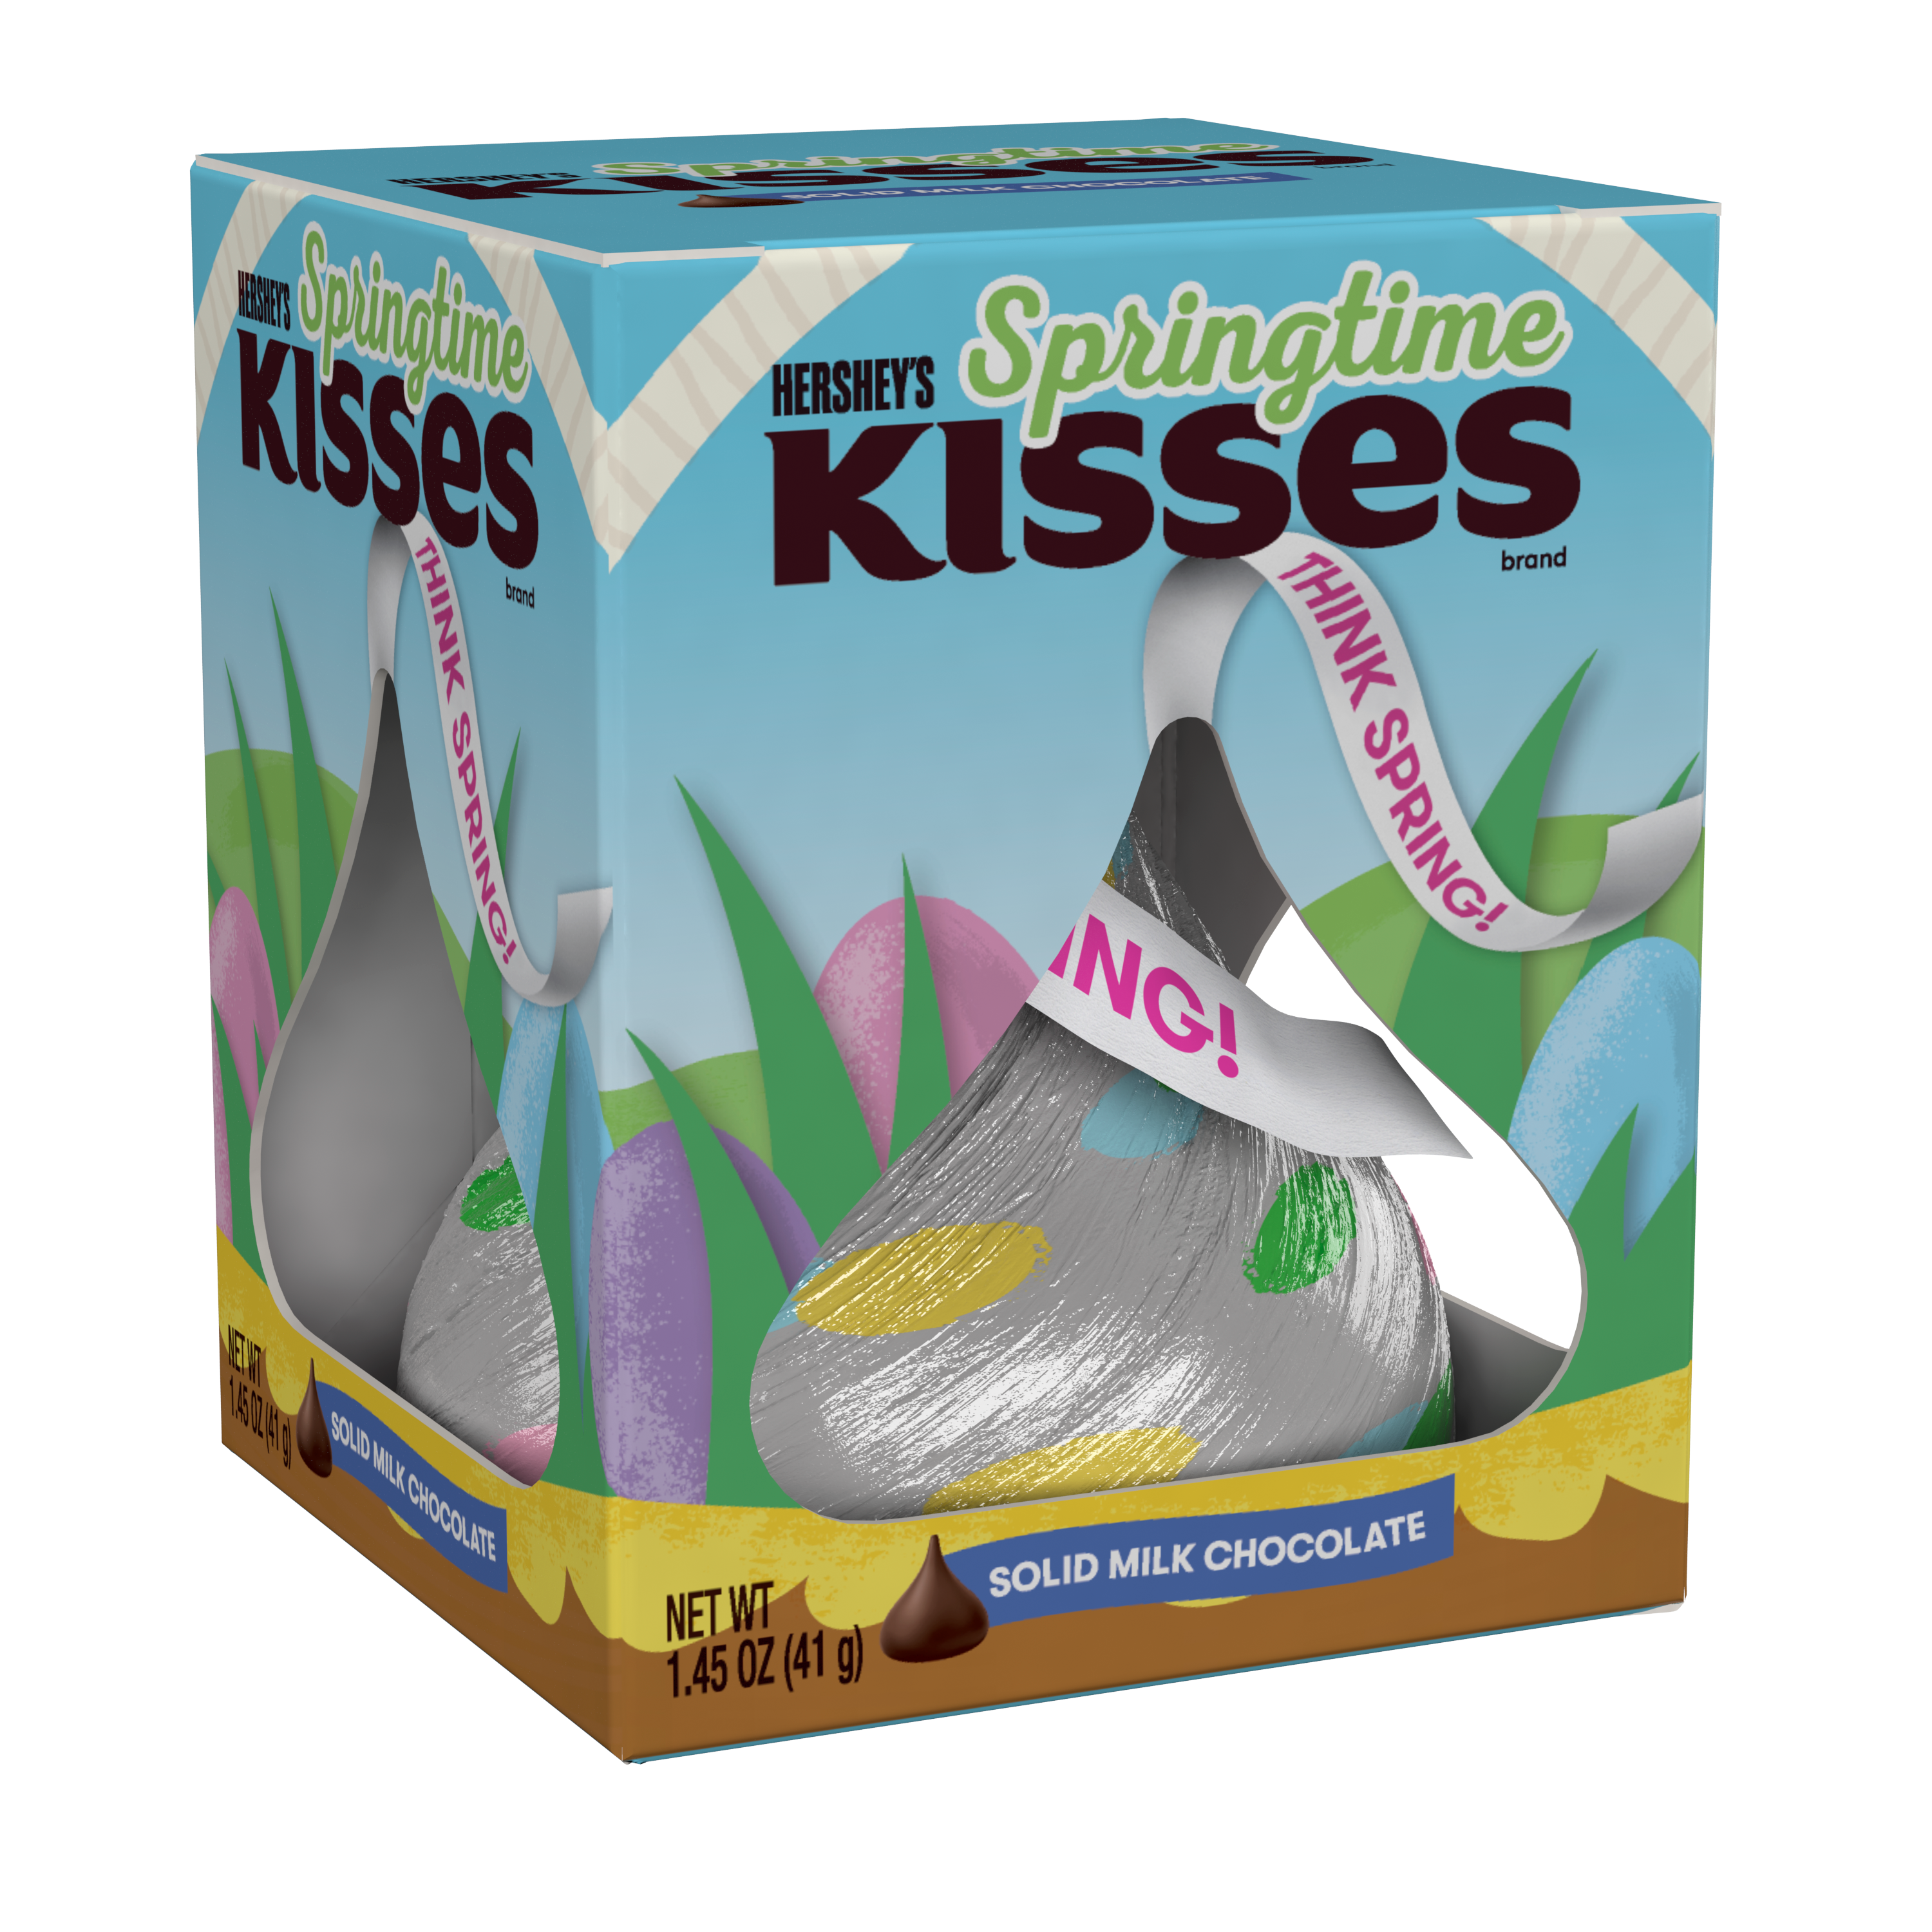 HERSHEY'S KISSES Easter Milk Chocolate Candy, 1.45 oz - Left Side of Package